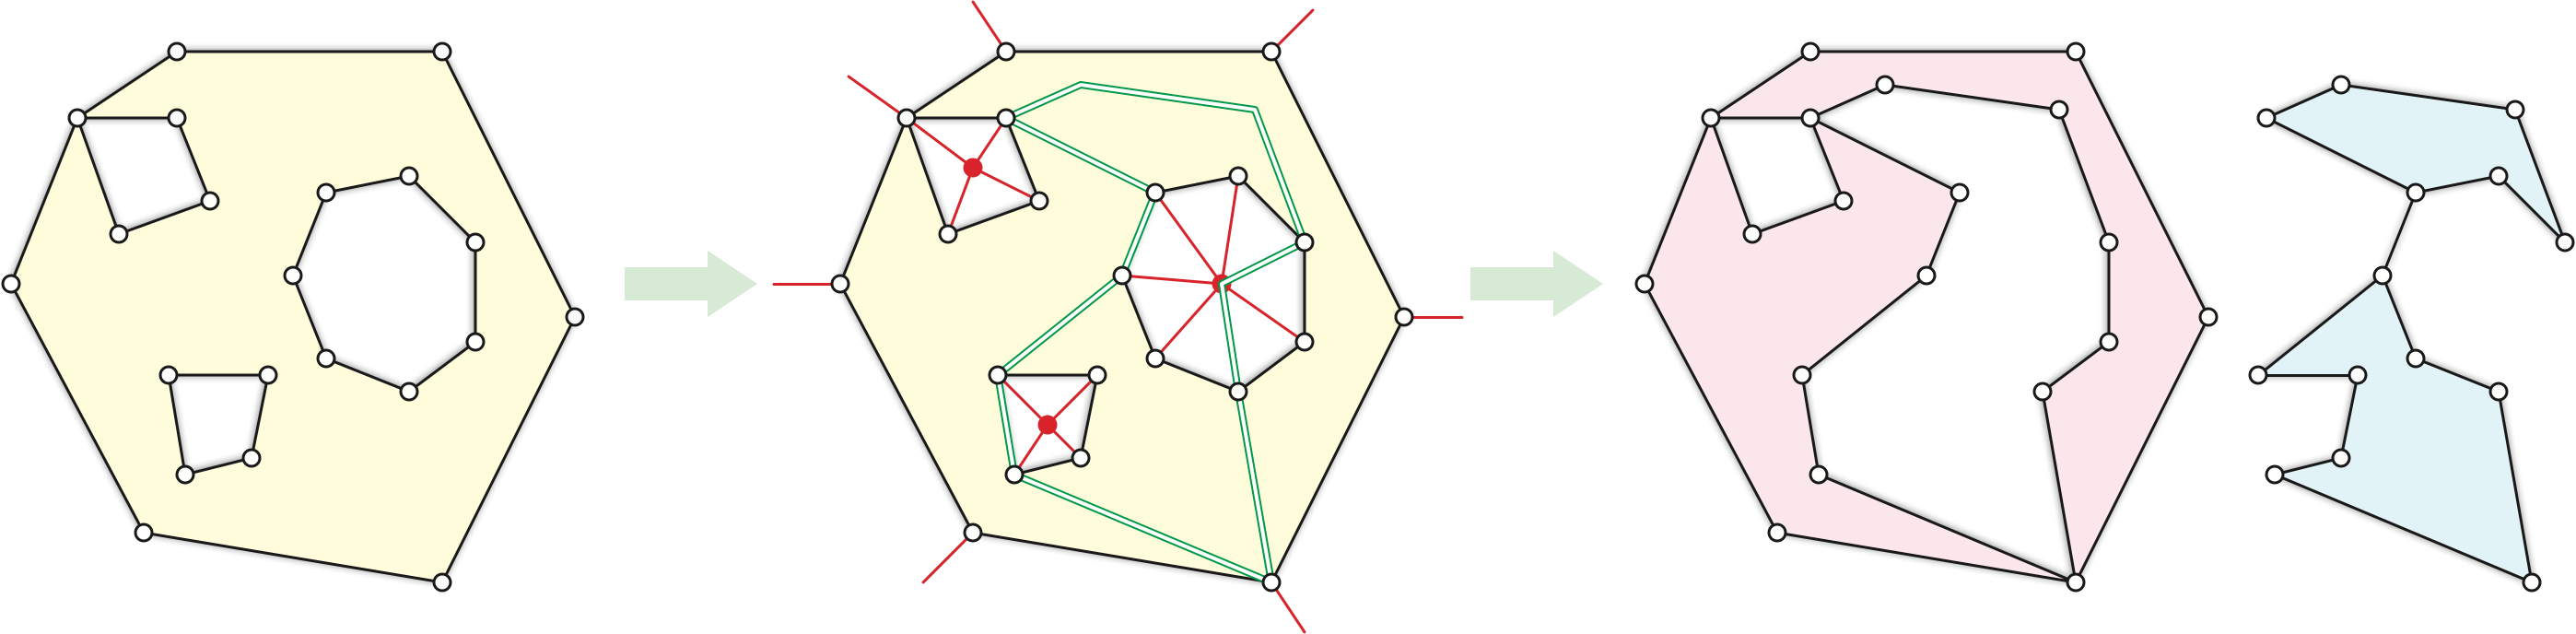 A region with three holes, a cycle separator for the triangulated region, and the resulting smaller regions.